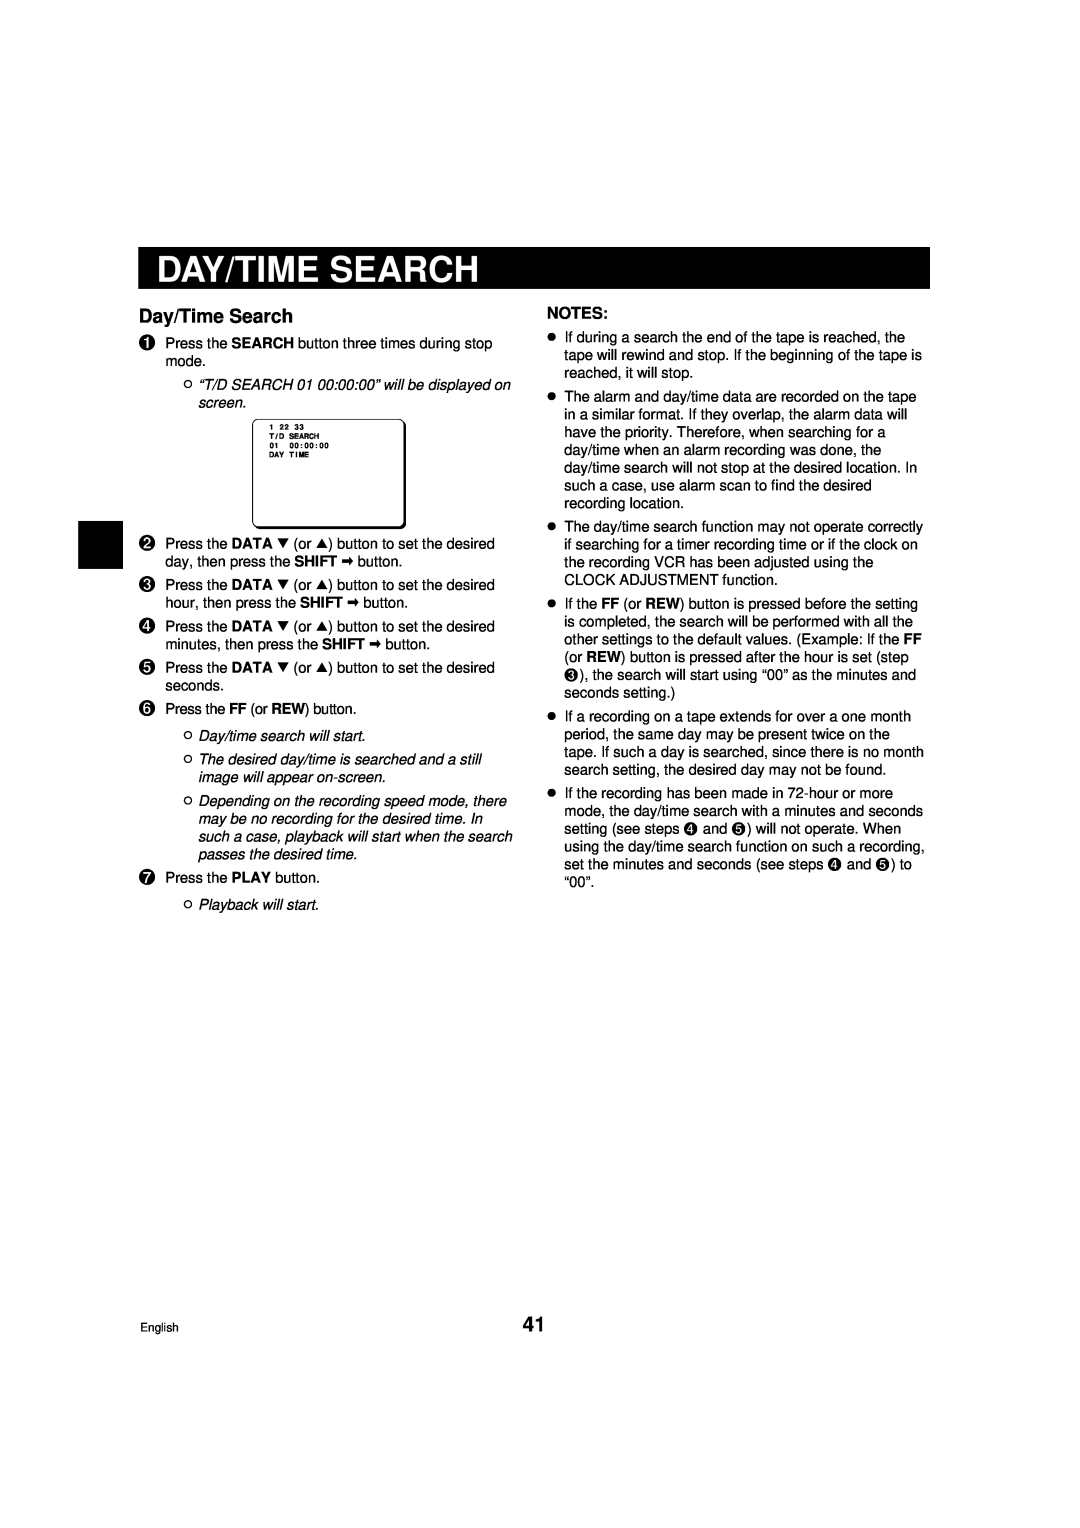 Sanyo DTL-4800 Day/Time Search, ø “T/D SEARCH 01 000000” will be displayed on screen, ø Day/time search will start 